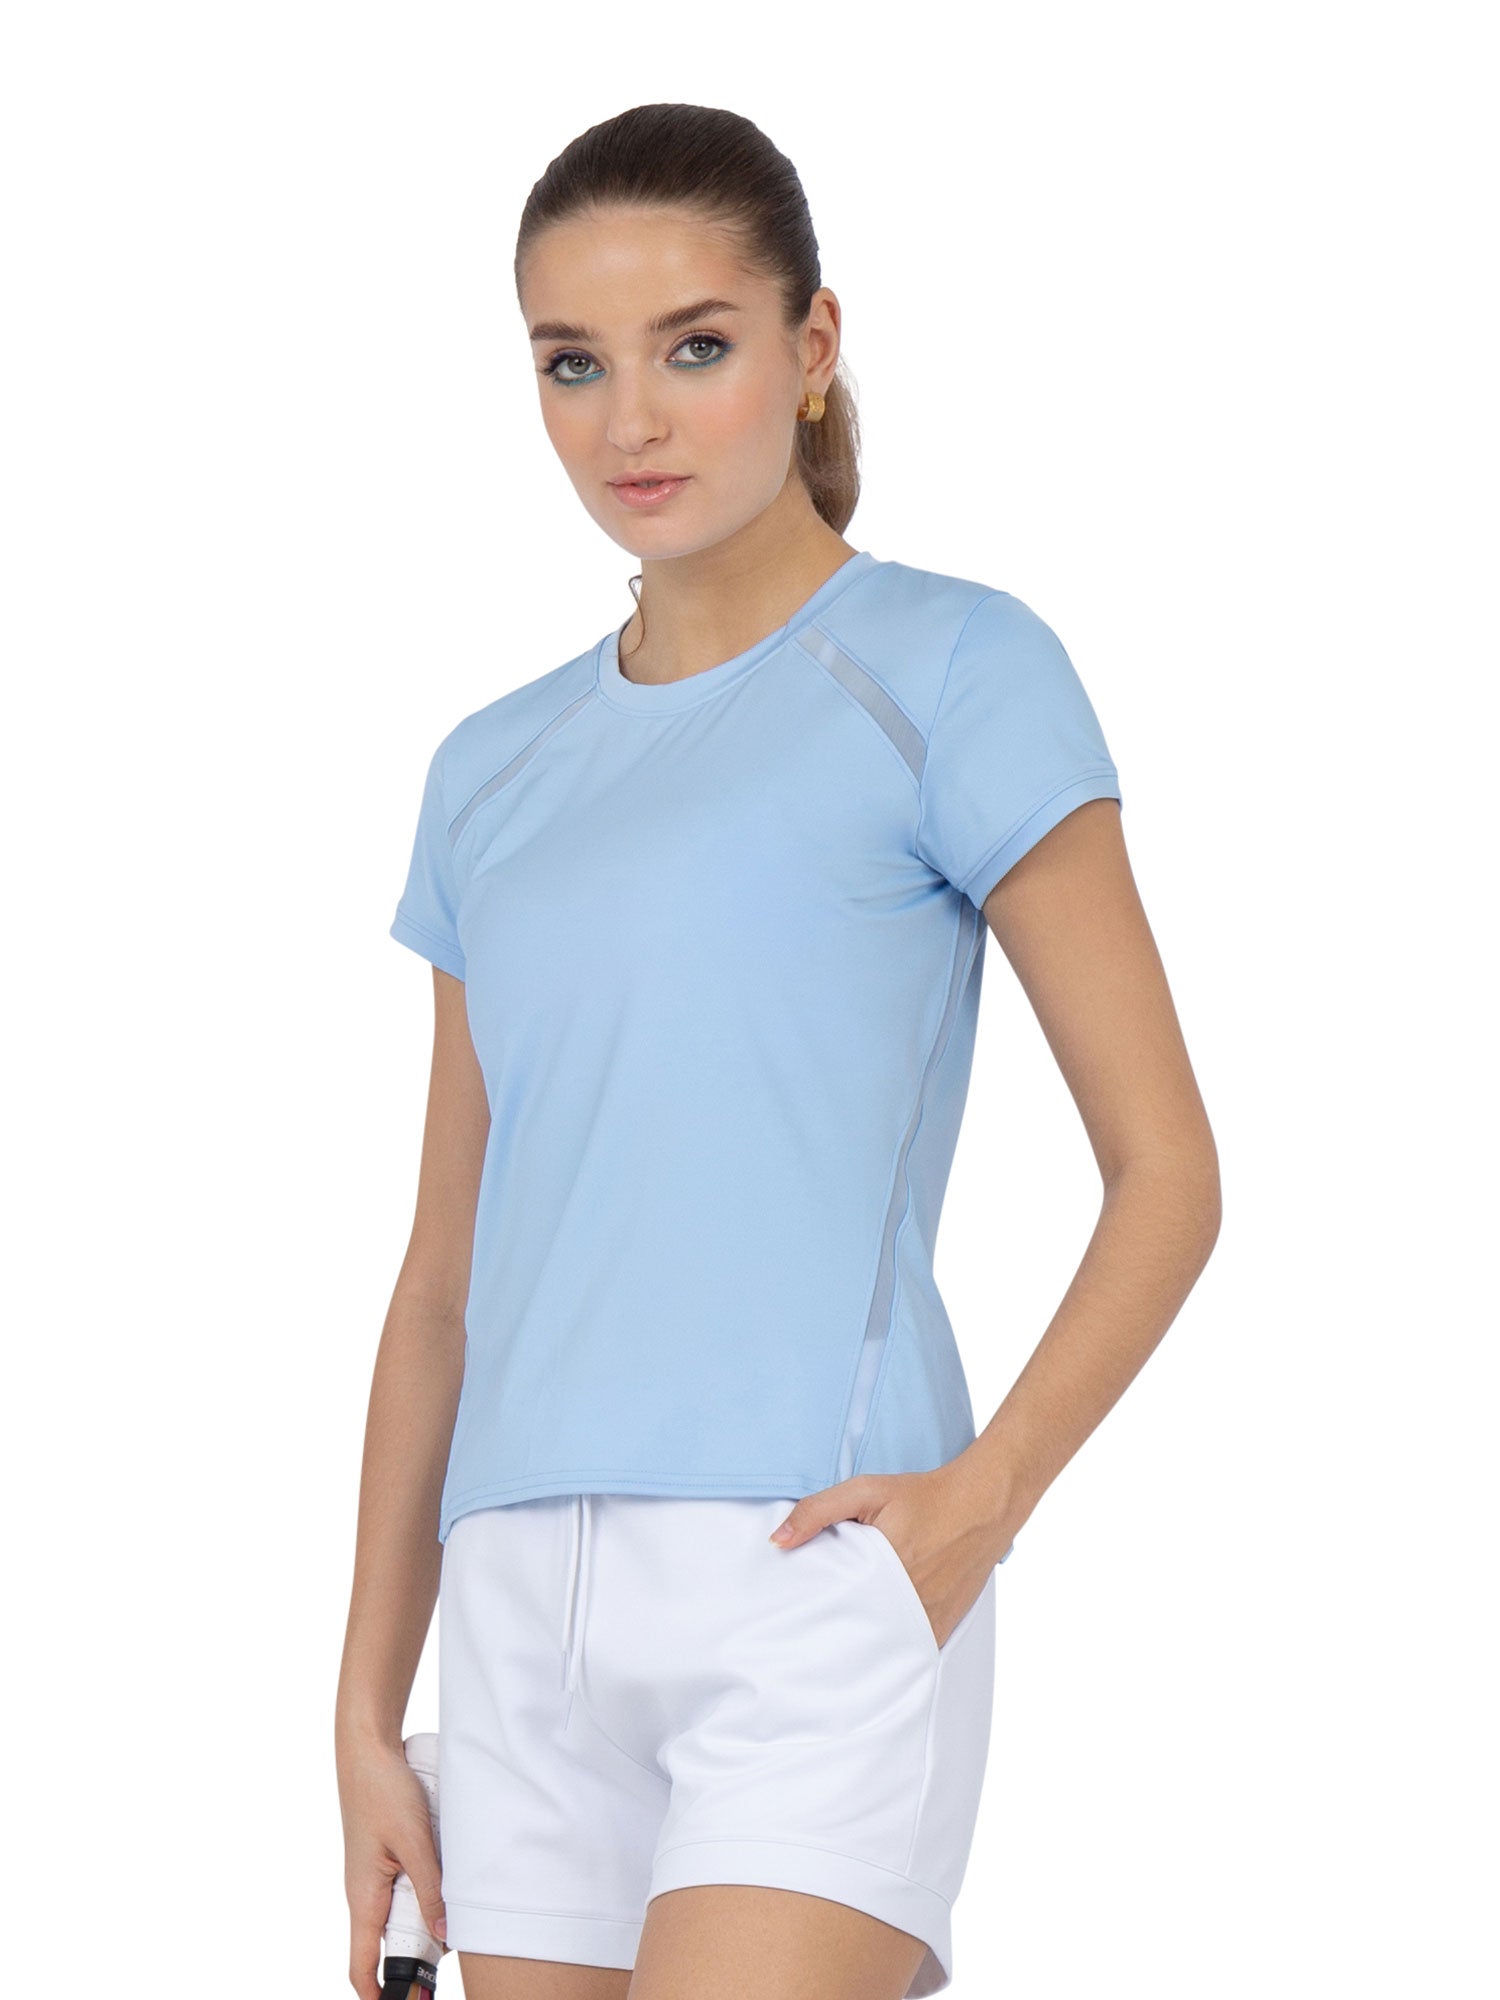 Front view of model wearing the classic short sleeve crew neck in bluebell by inPhorm NYC with one hand in her pocket